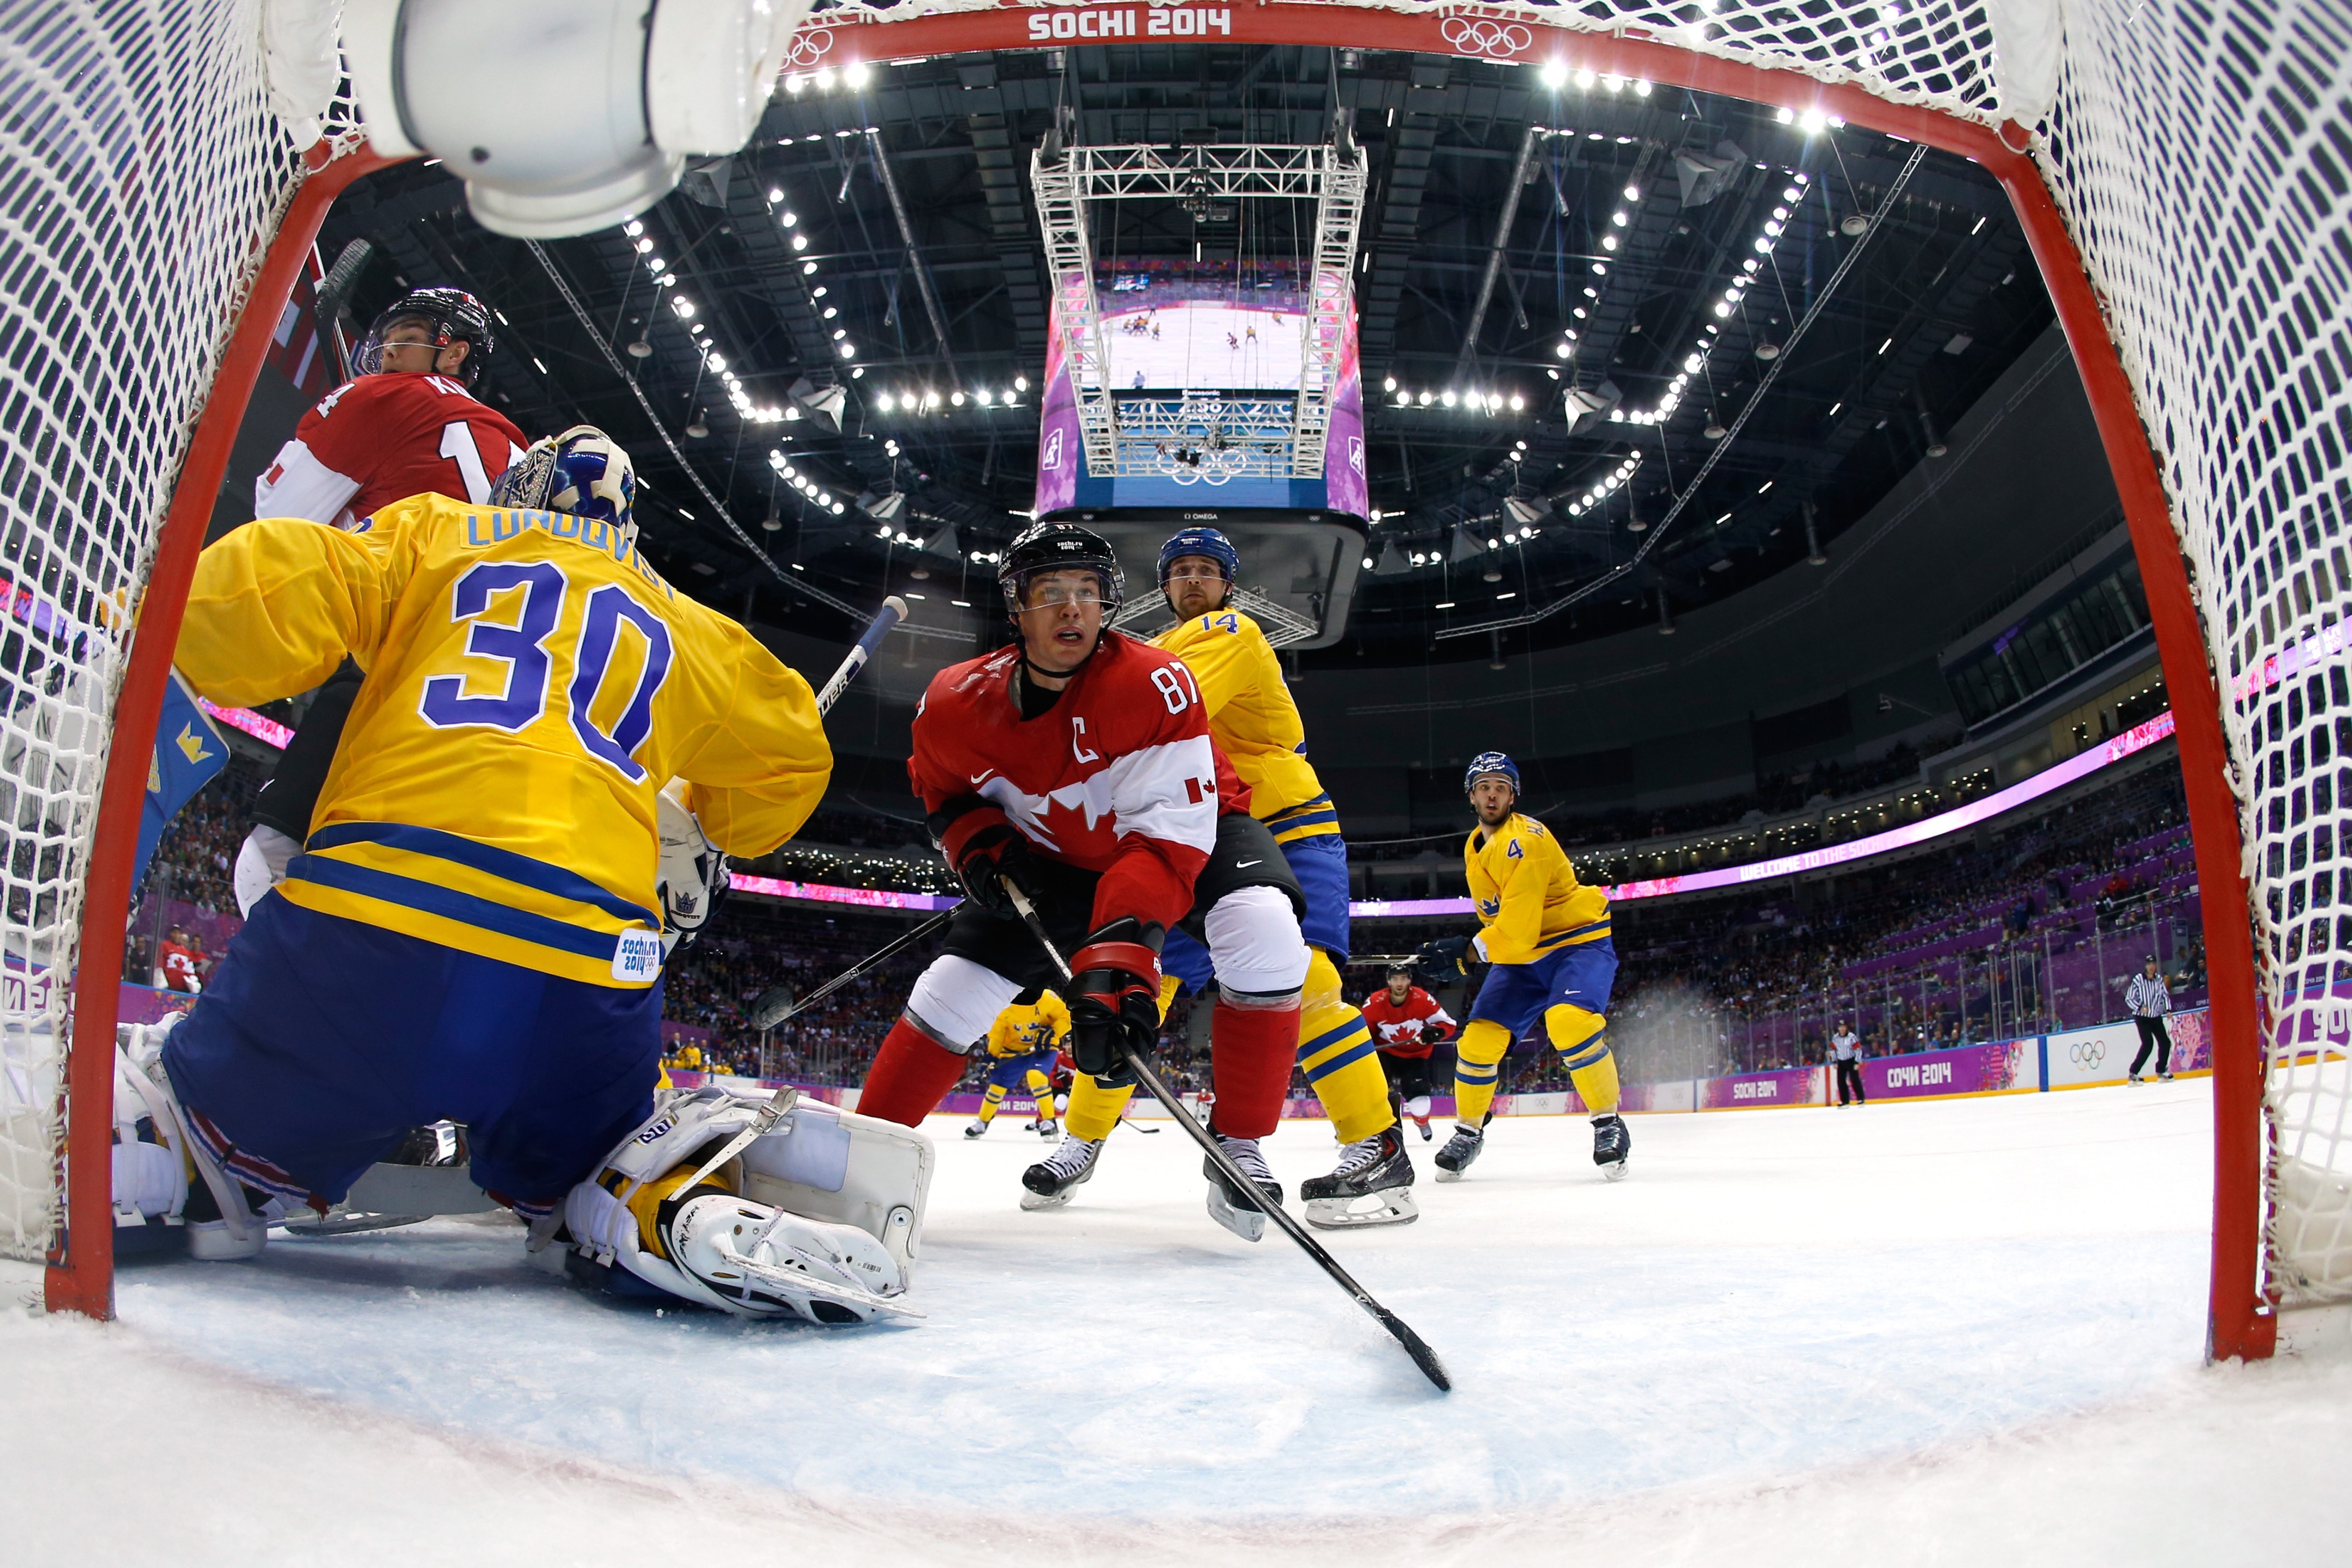 Henrik Lundqvist #30 of Sweden defends his goal as Sidney Crosby #87 of Canada closes in during the Men's Ice Hockey Gold Medal match on Day 16 of the 2014 Sochi Winter Olympics at Bolshoy Ice Dome on February 23, 2014 in Sochi, Russia. (Pool—Getty Images) (Pool—Getty Images))